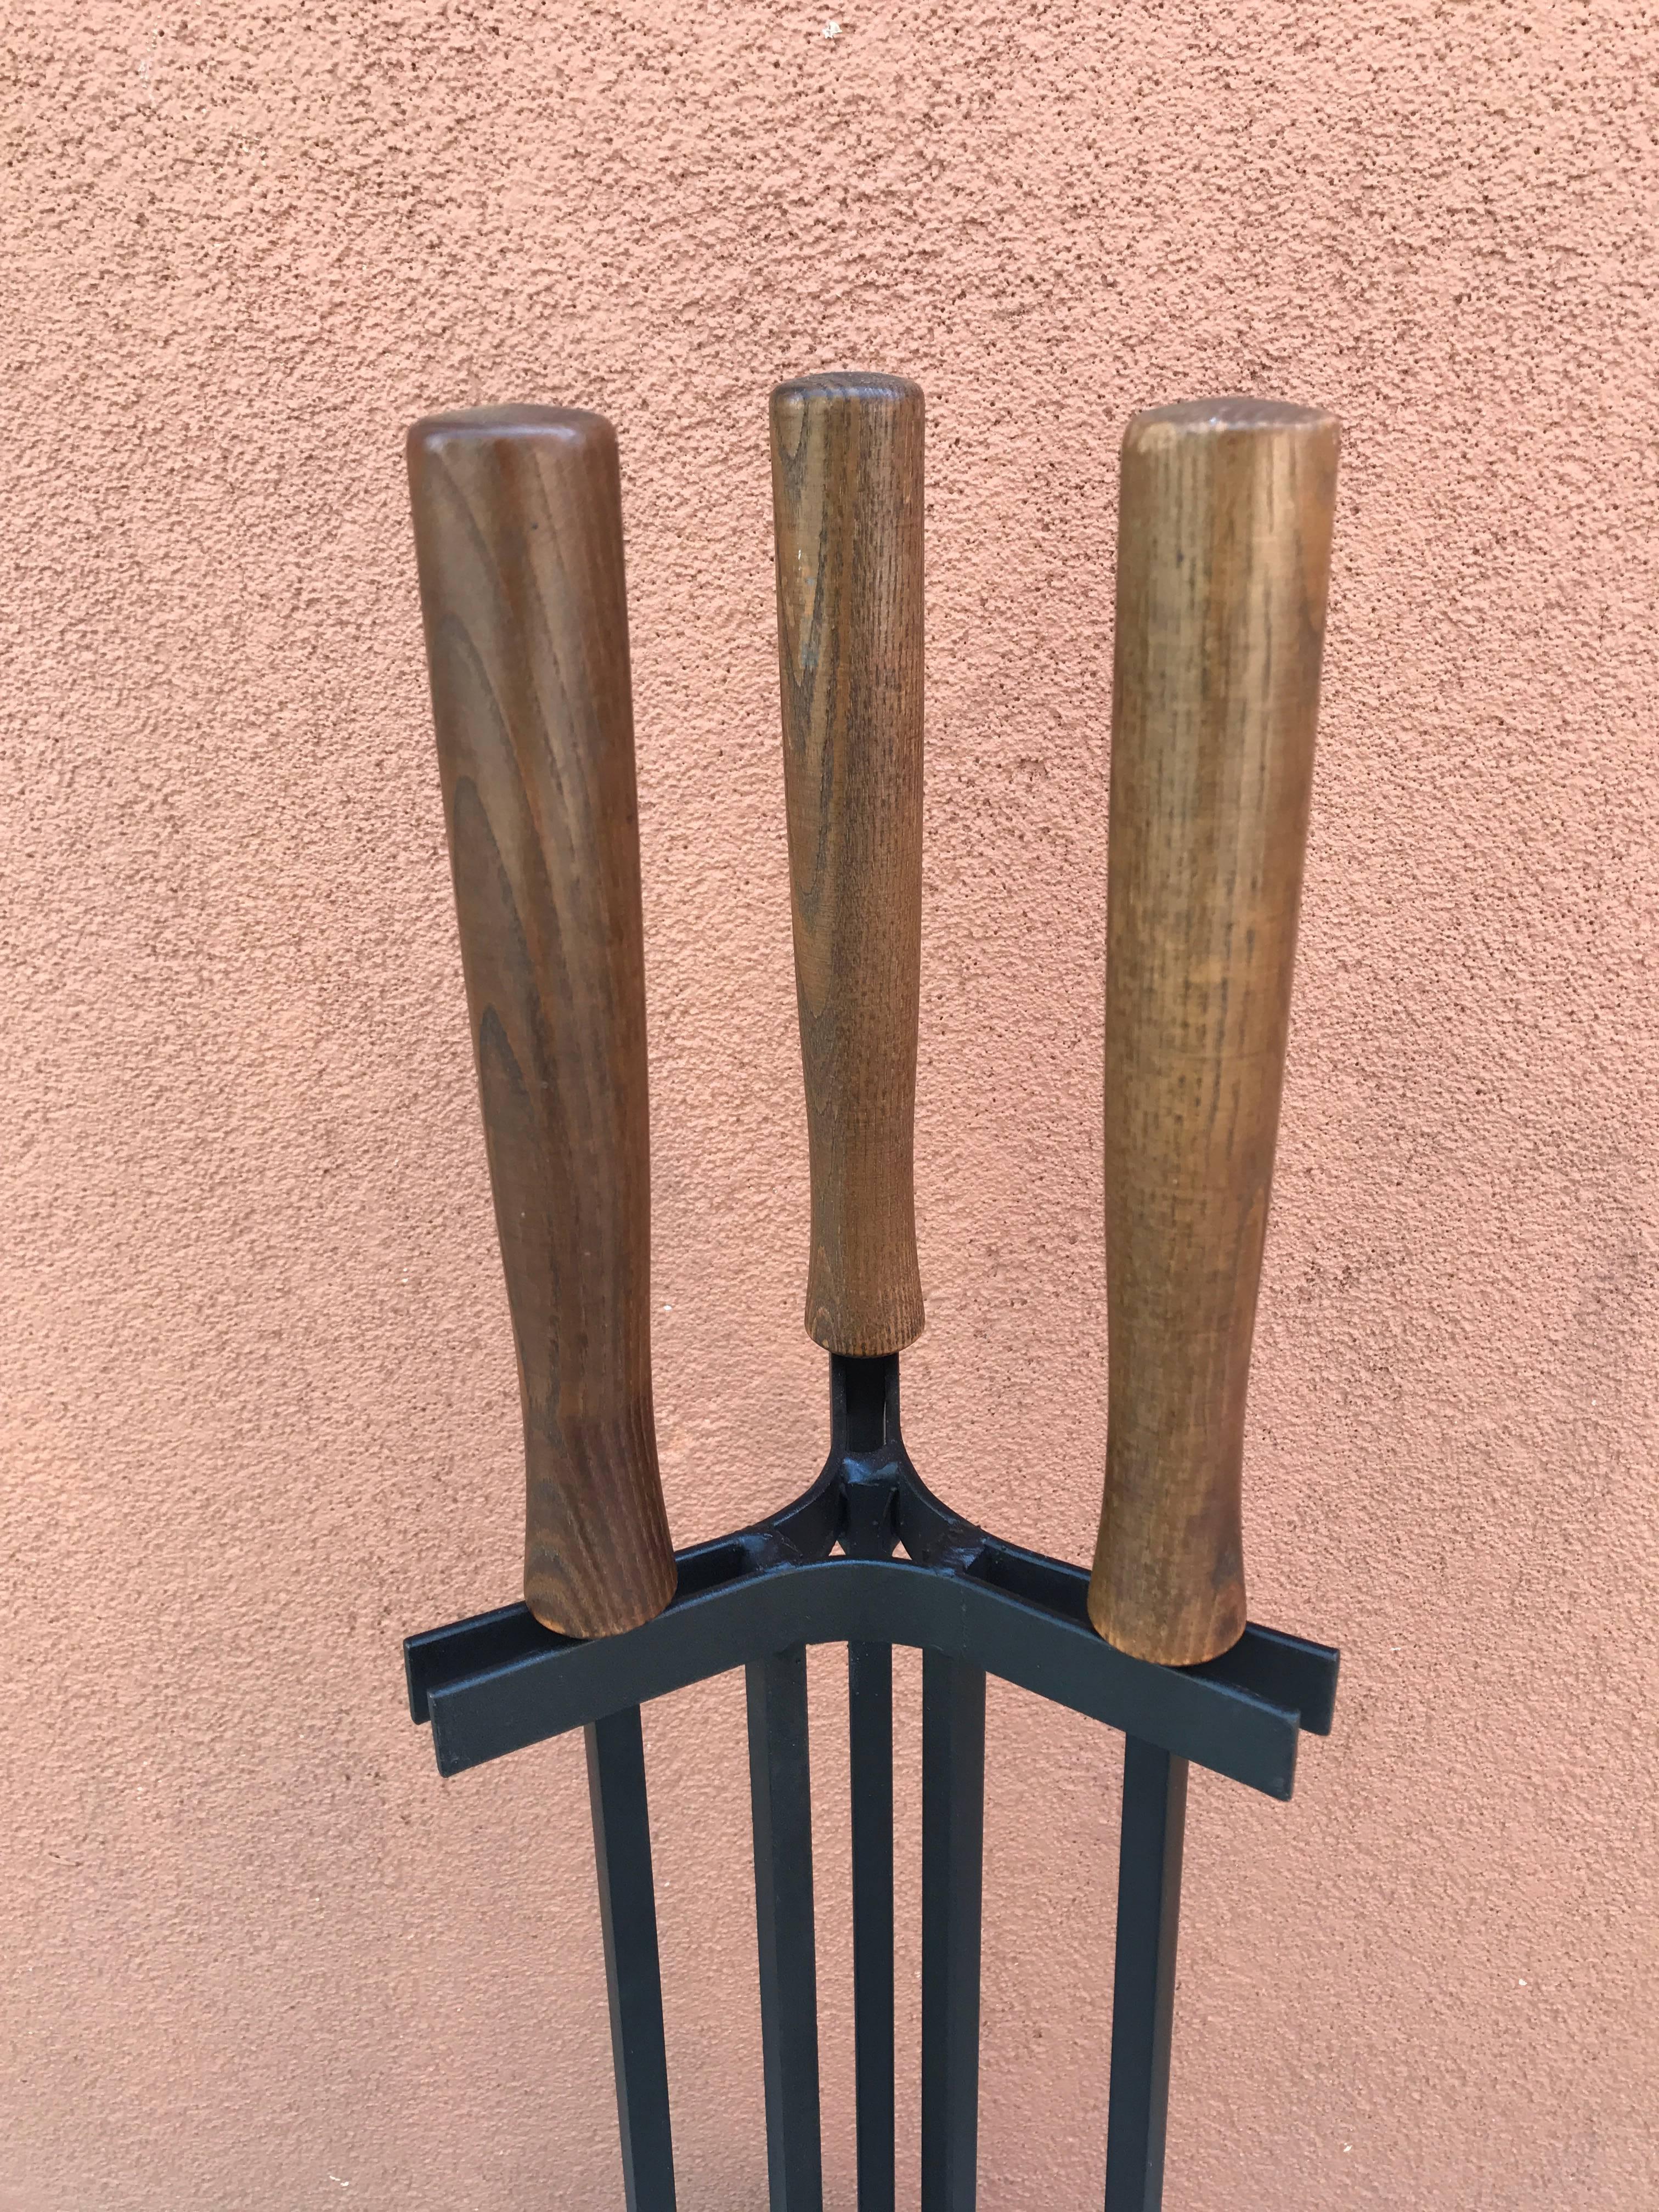 American Modern Iron and Wood Fireplace Tools For Sale 1